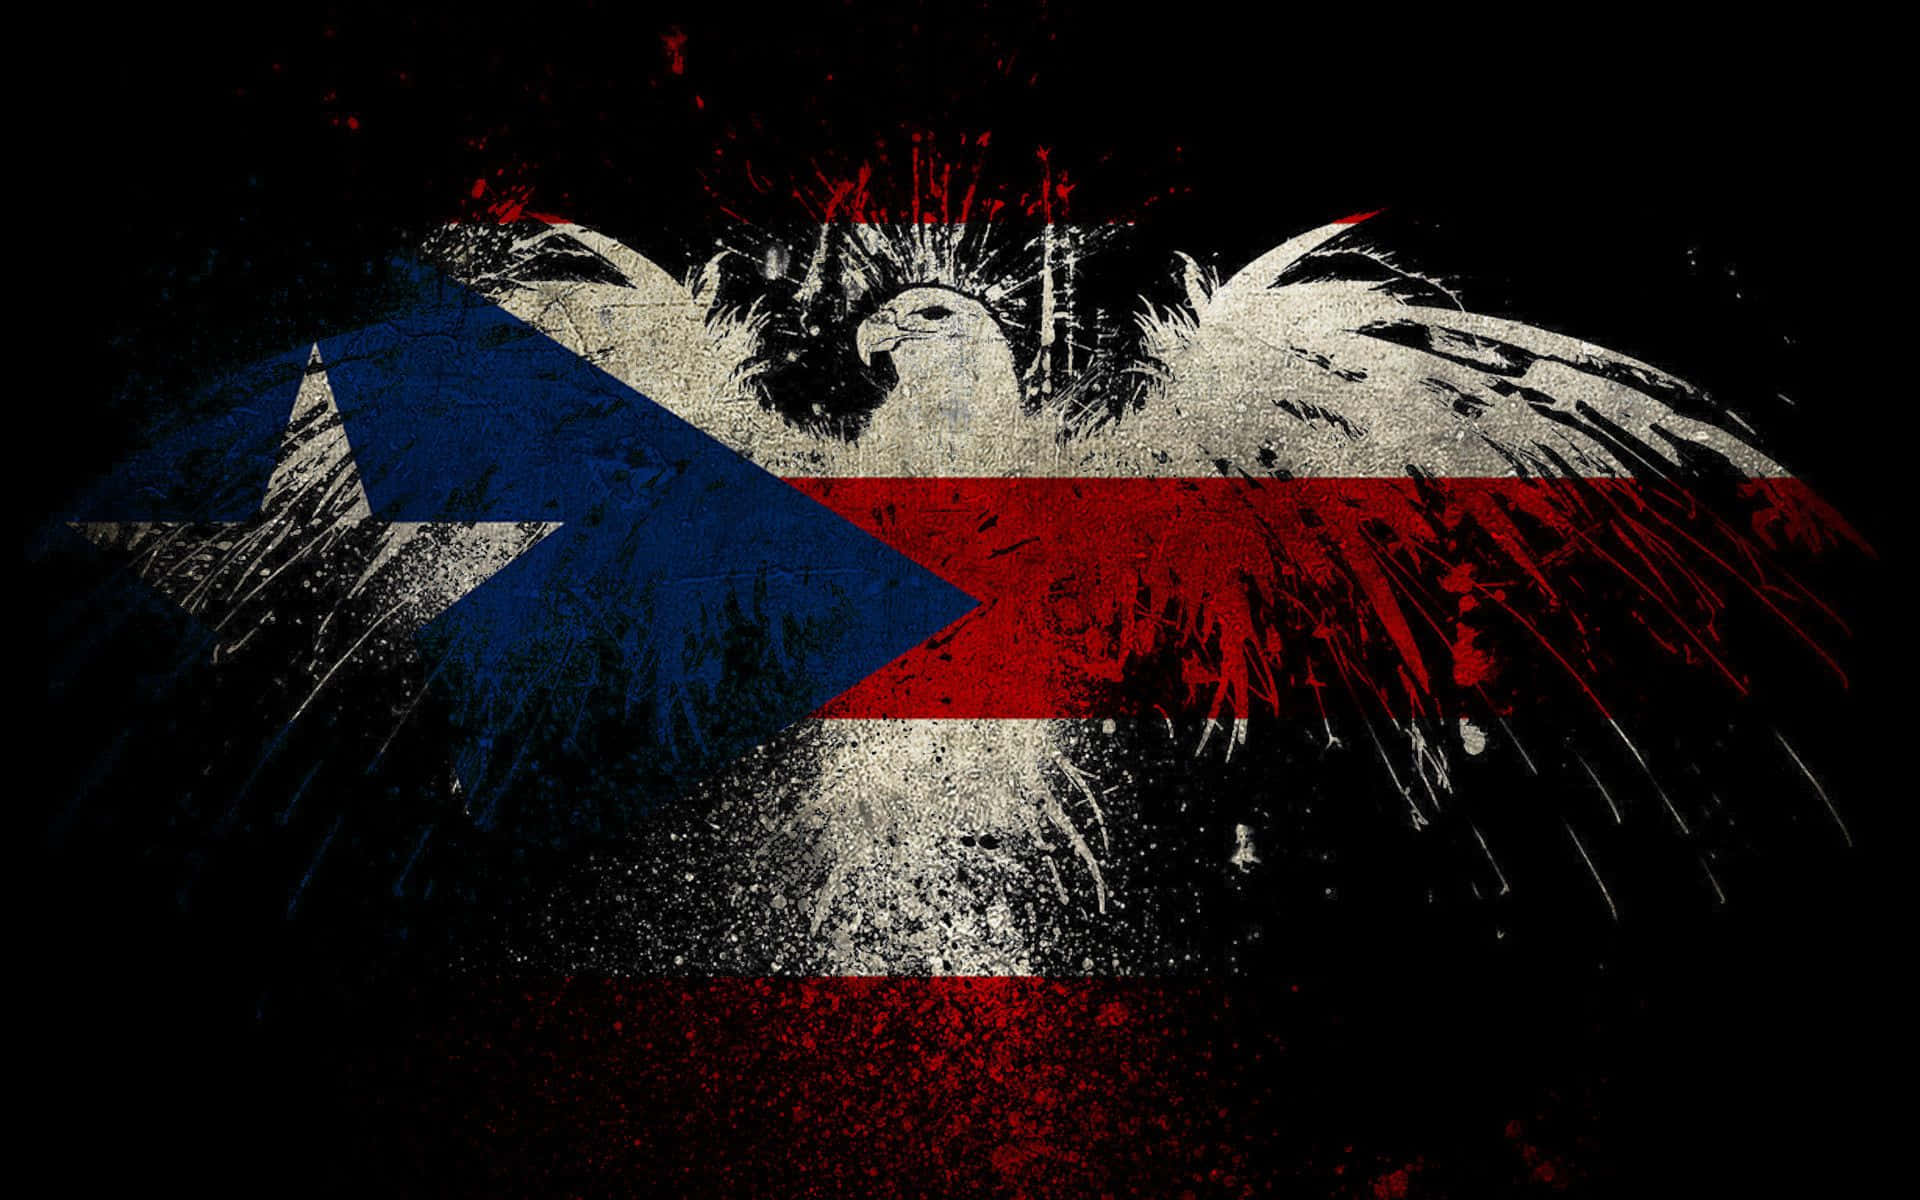 A Typical Sights of Puerto Rican Beauty Wallpaper